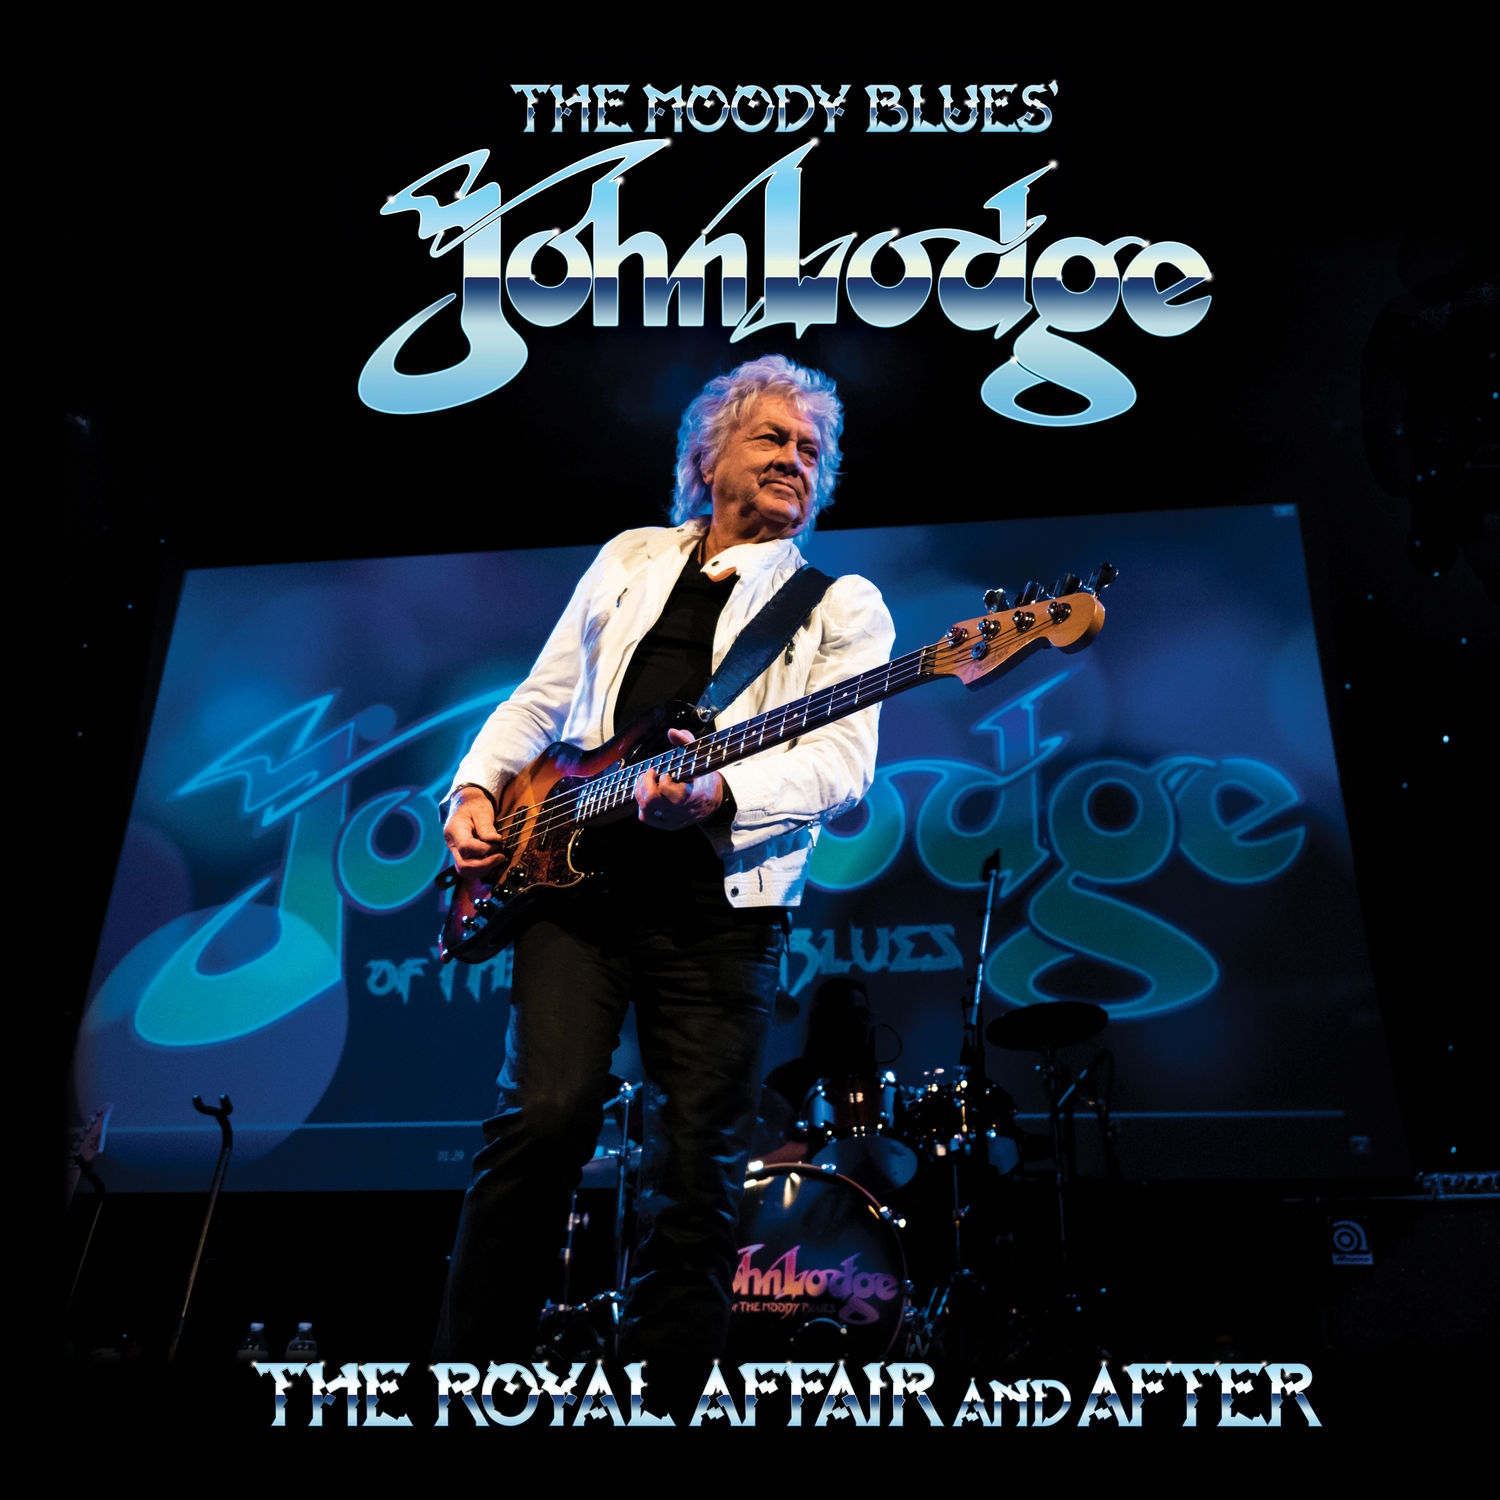 John Lodge (The Moody Blues') - The Royal Affair and After (Live) - 2022 (Prog Rock, Art Rock, Classic Rock)